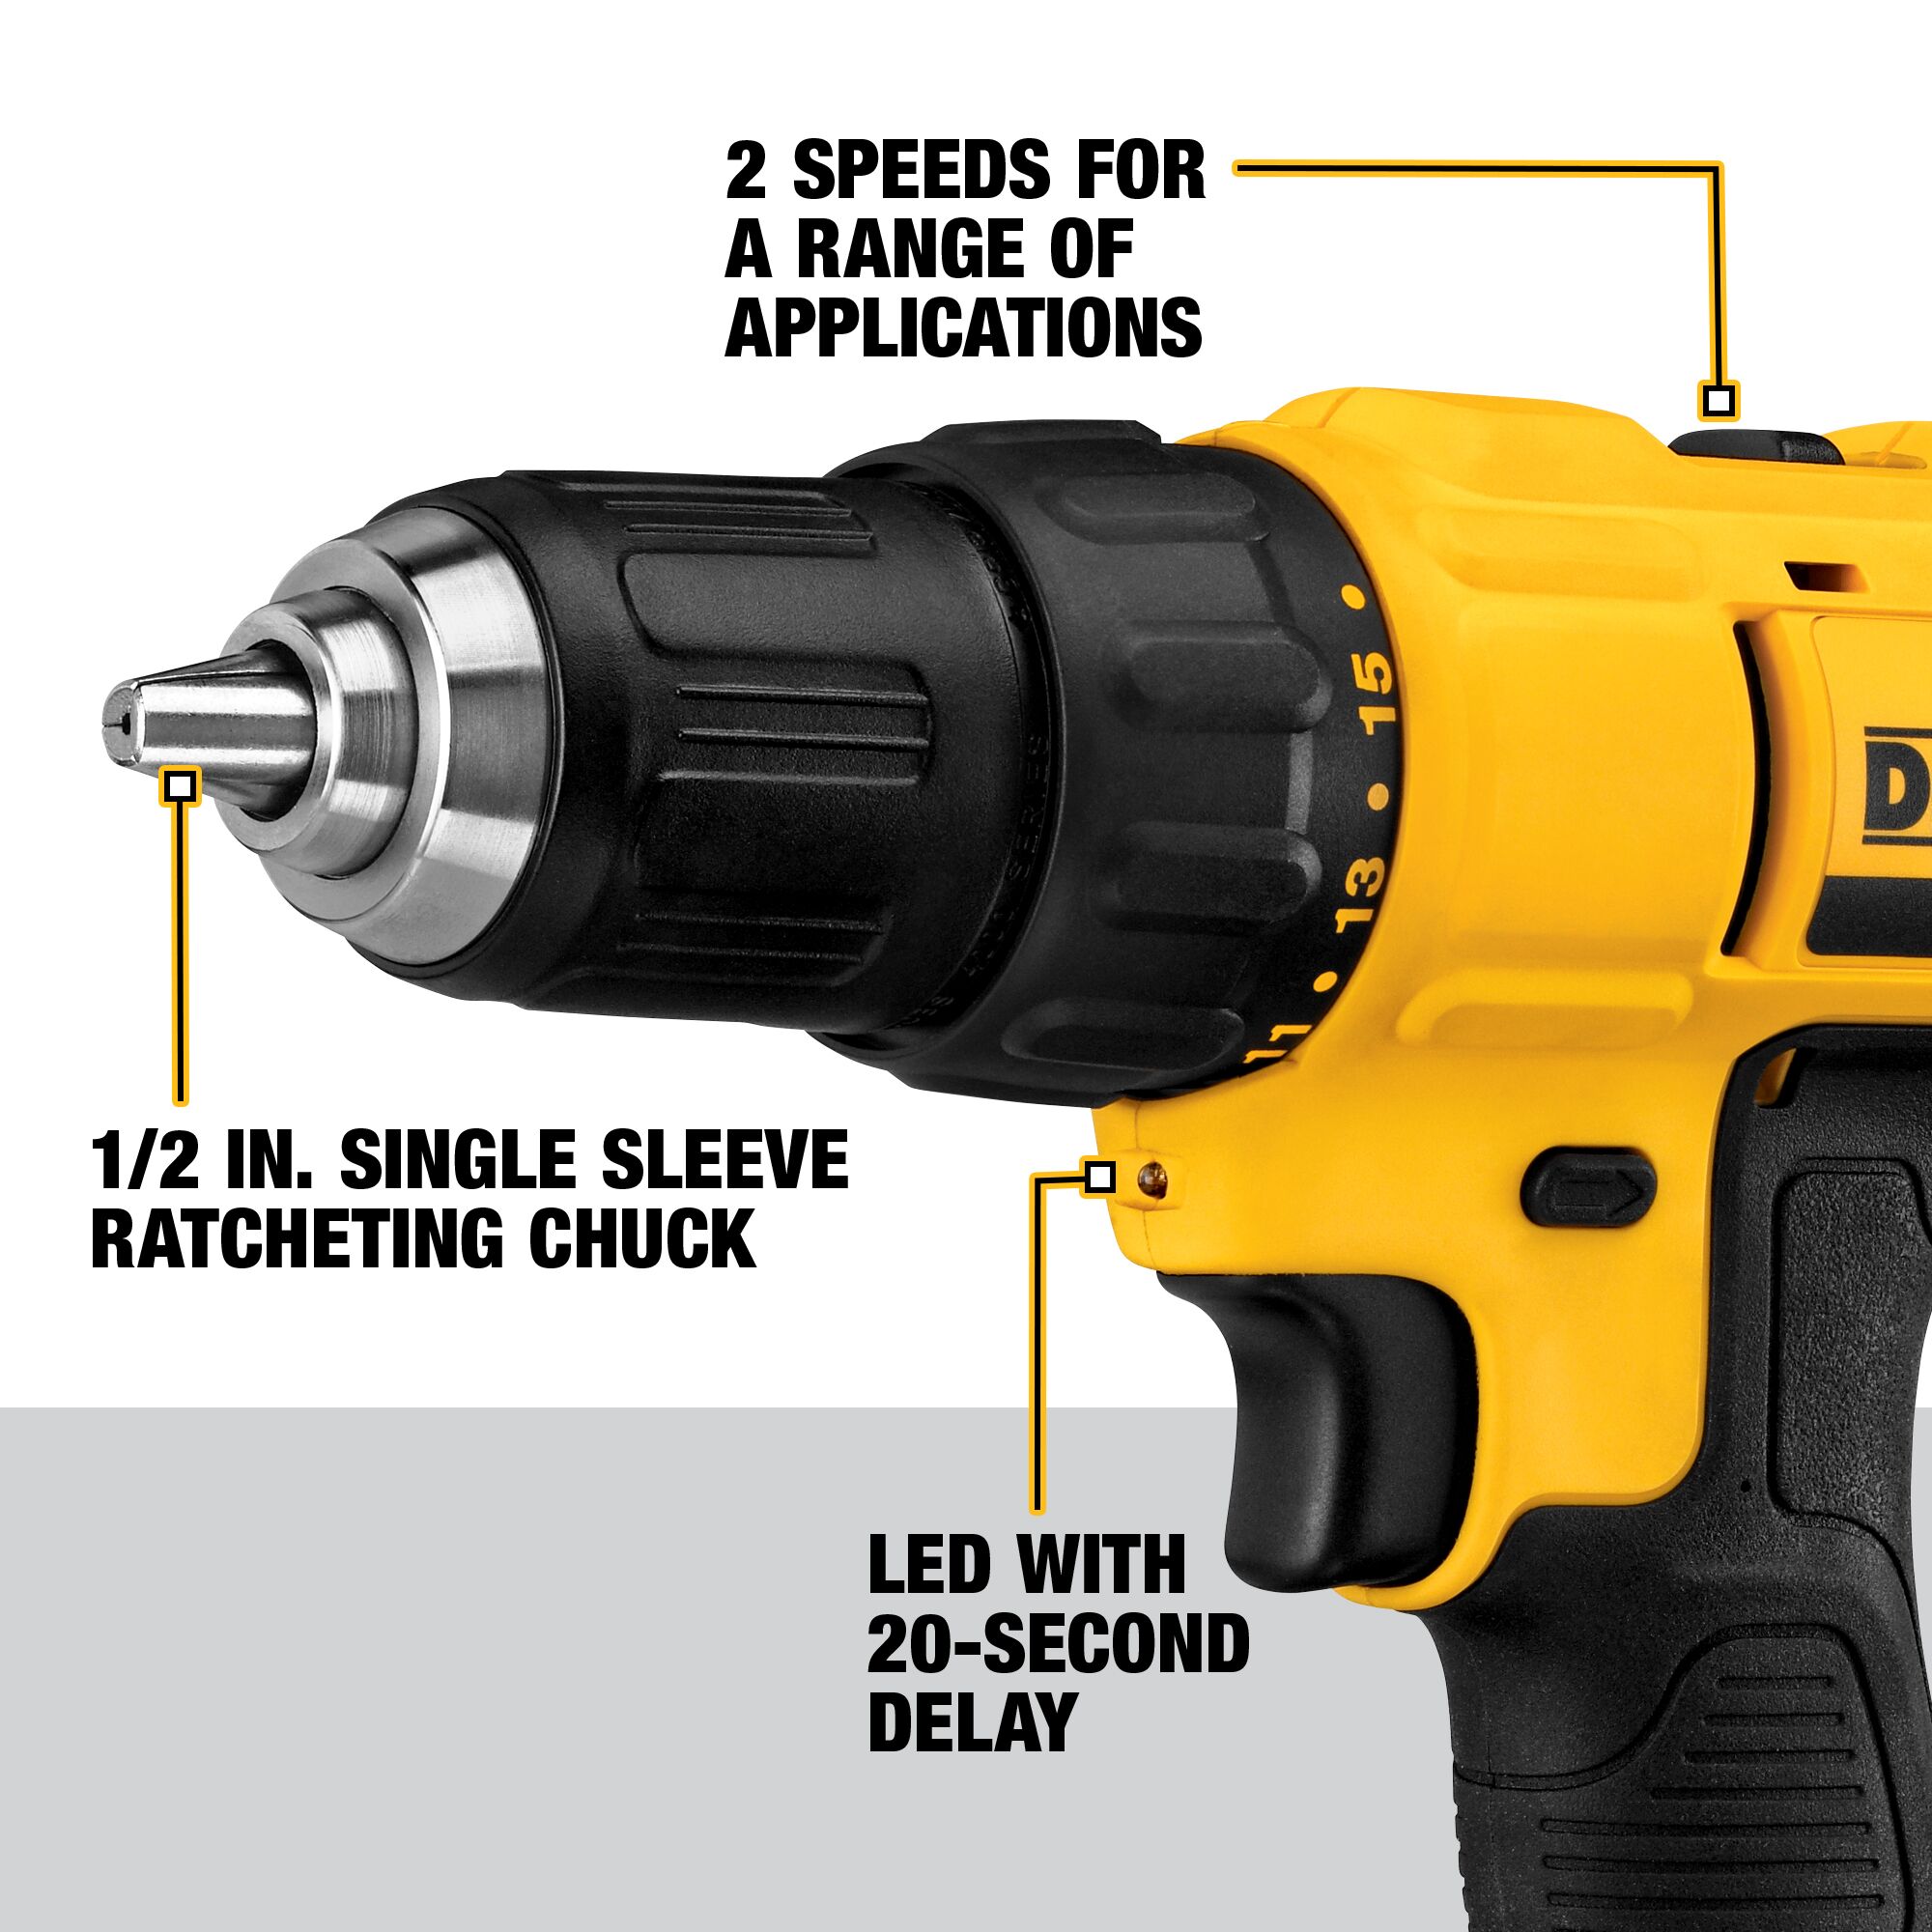 DEWALT 18-volt 1/2-in Cordless Drill (2-Batteries Included